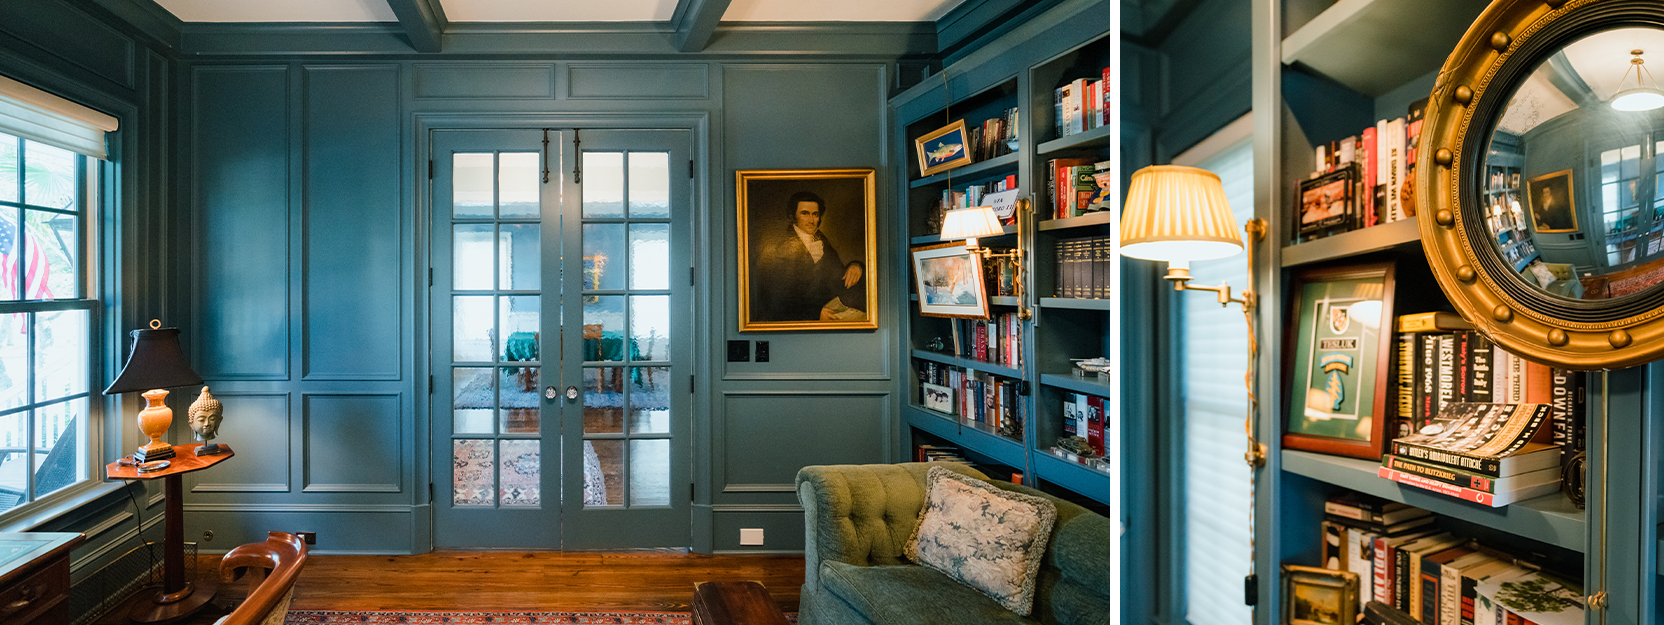 Muted blue color-drenched home library space with coffered ceilings, wood floors, tufted settee, painted portrait hanging next to French doors.